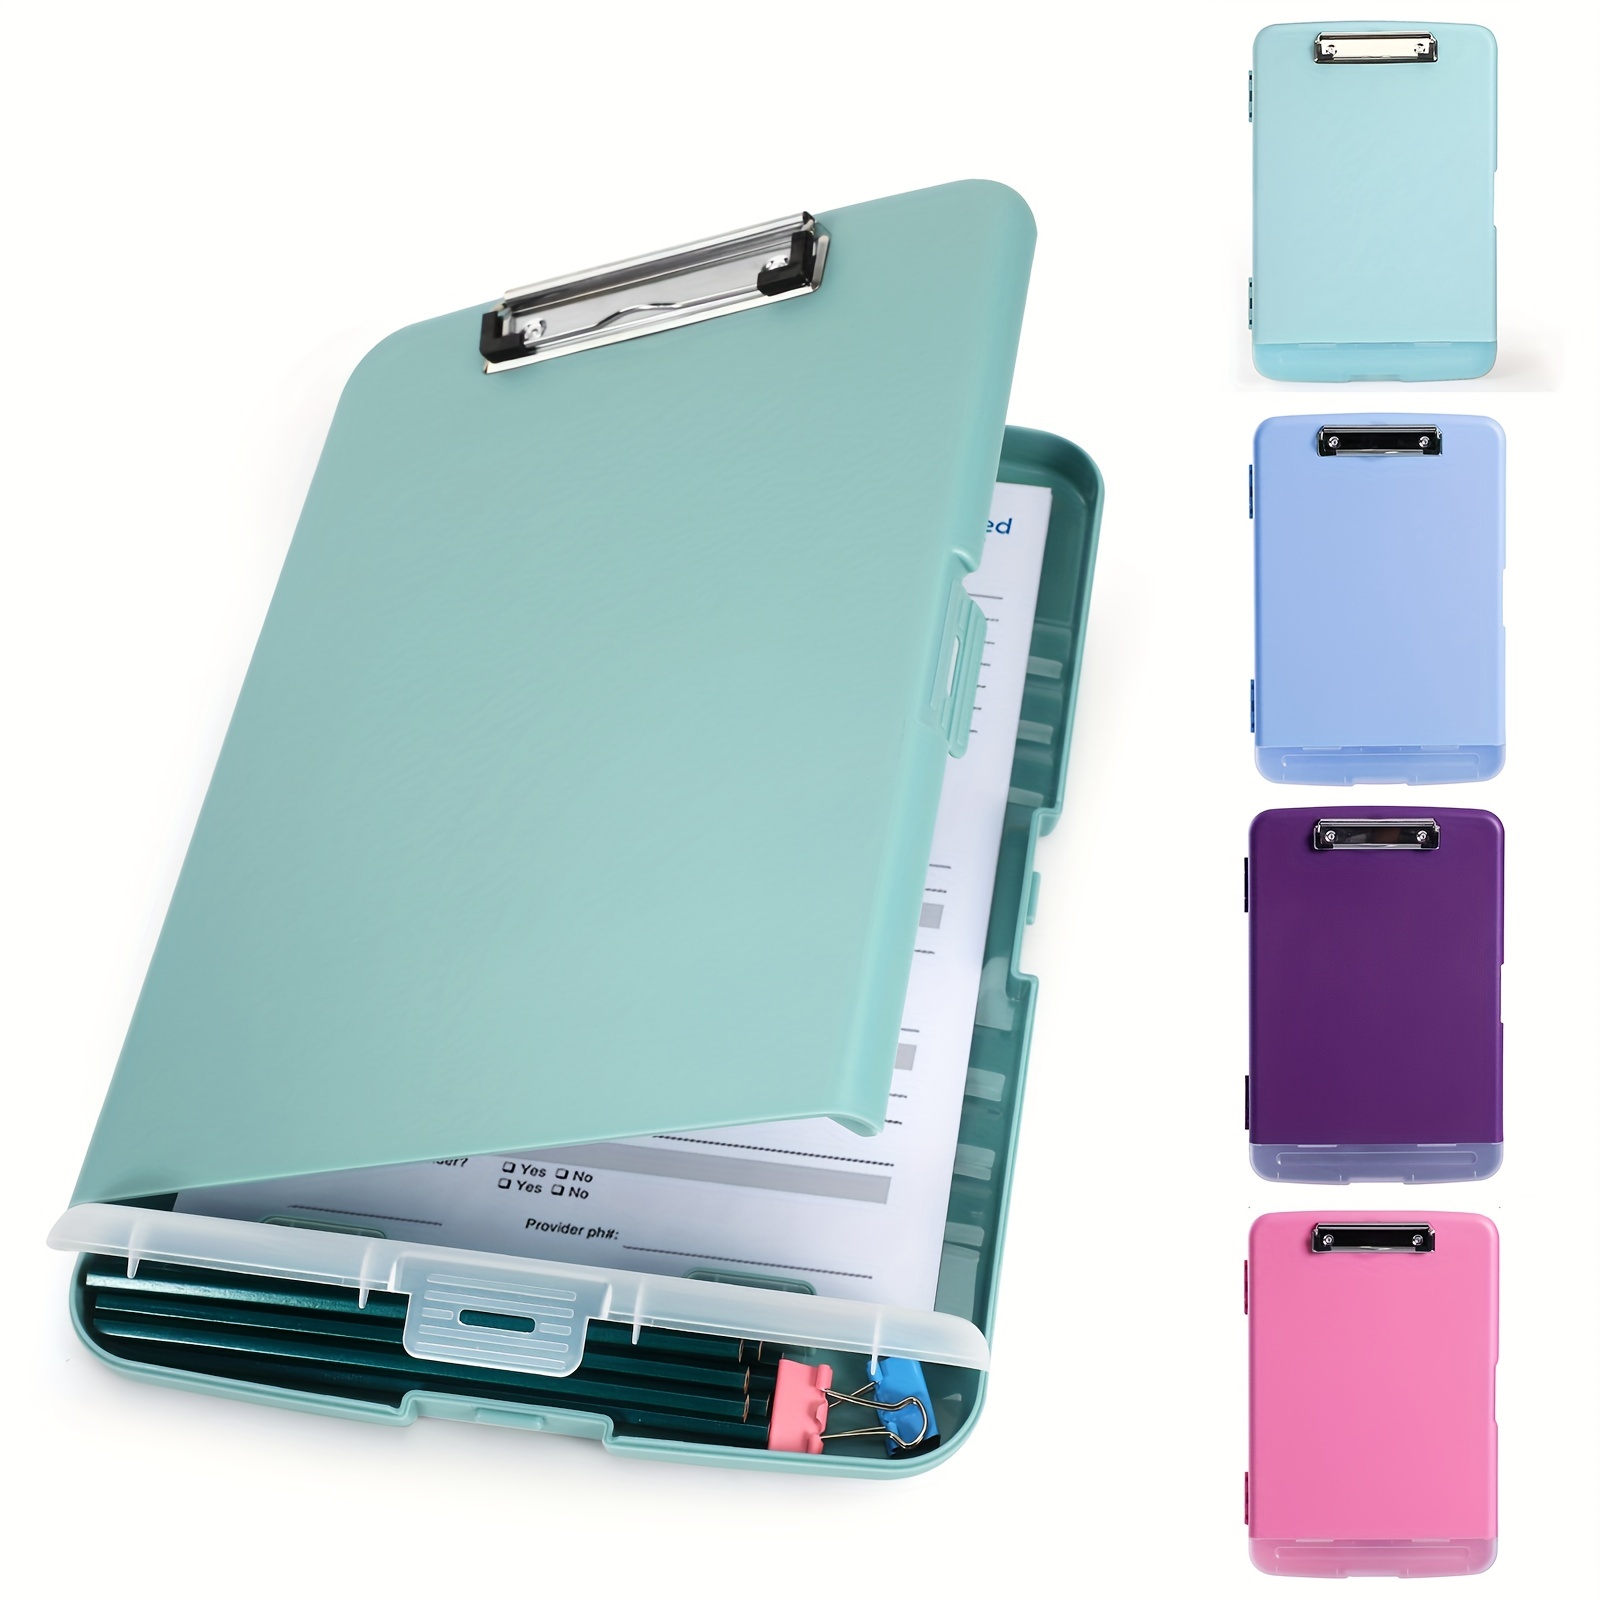 

8.5x11 Clipboard With Storage, Plastic A4 Clips Board With Pen Holder To Keep Your Documents Organized